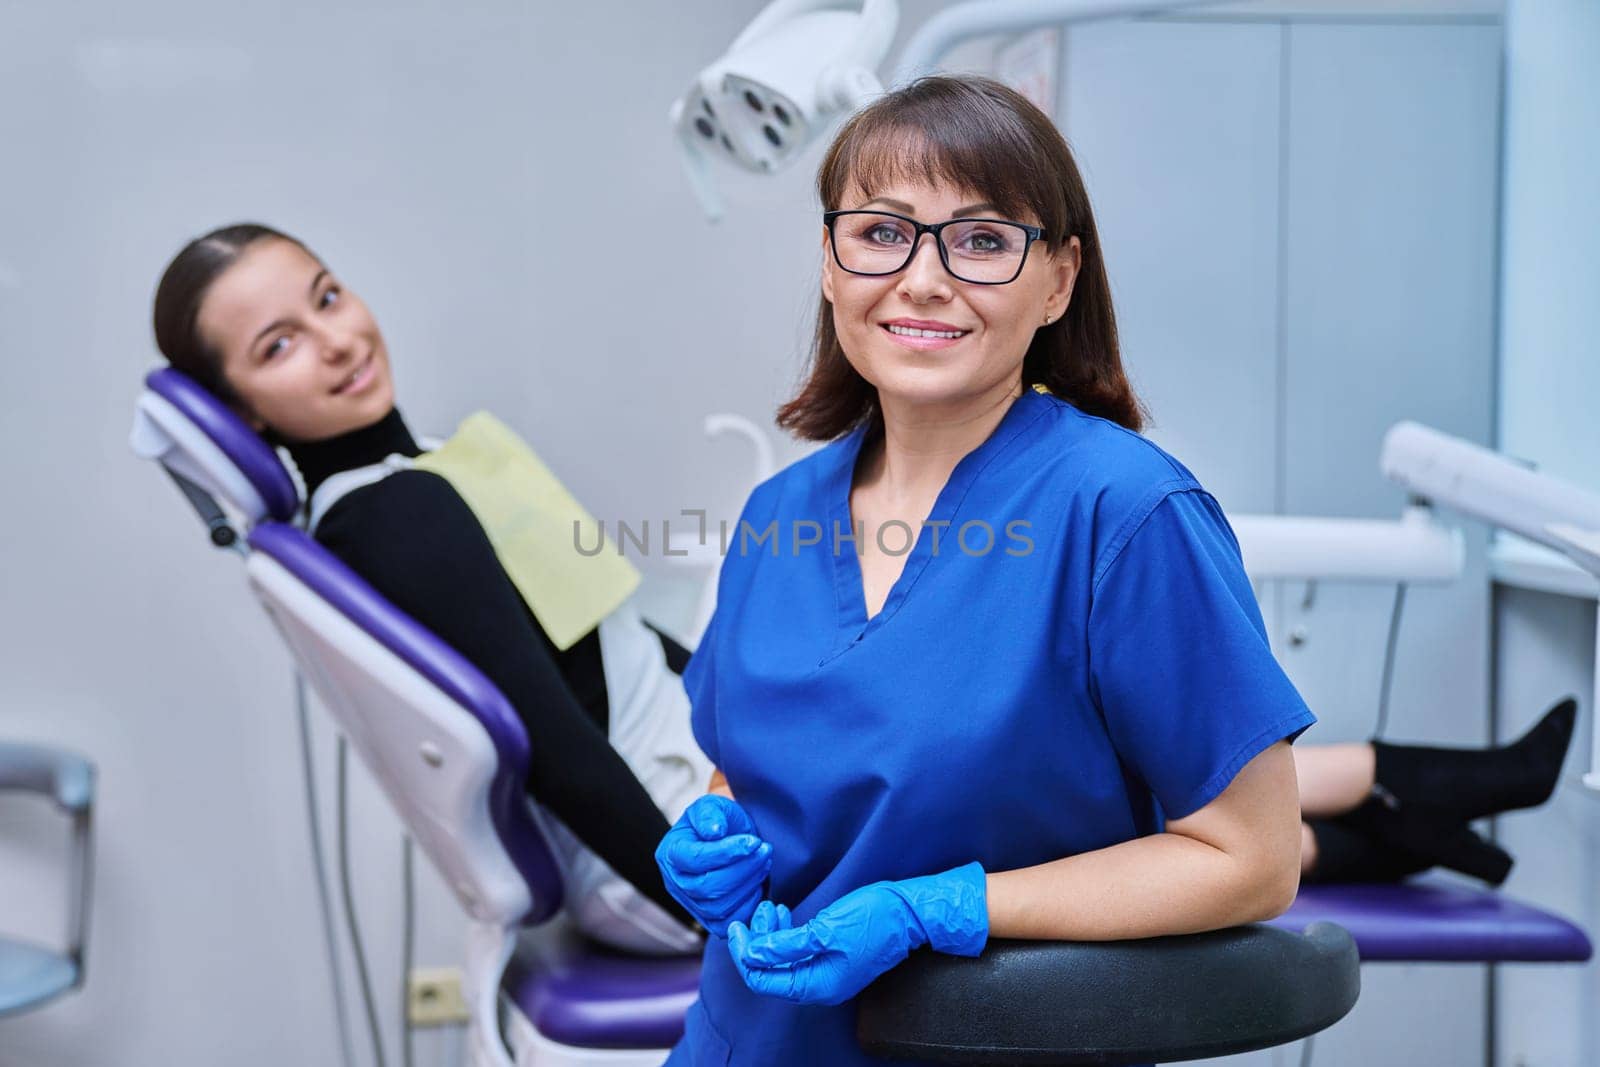 Portrait of smiling female dentist looking at camera with young teenage girl patient sitting in dental chair. Visit to dentist examination treatment. Dentistry hygiene dental teeth health care concept